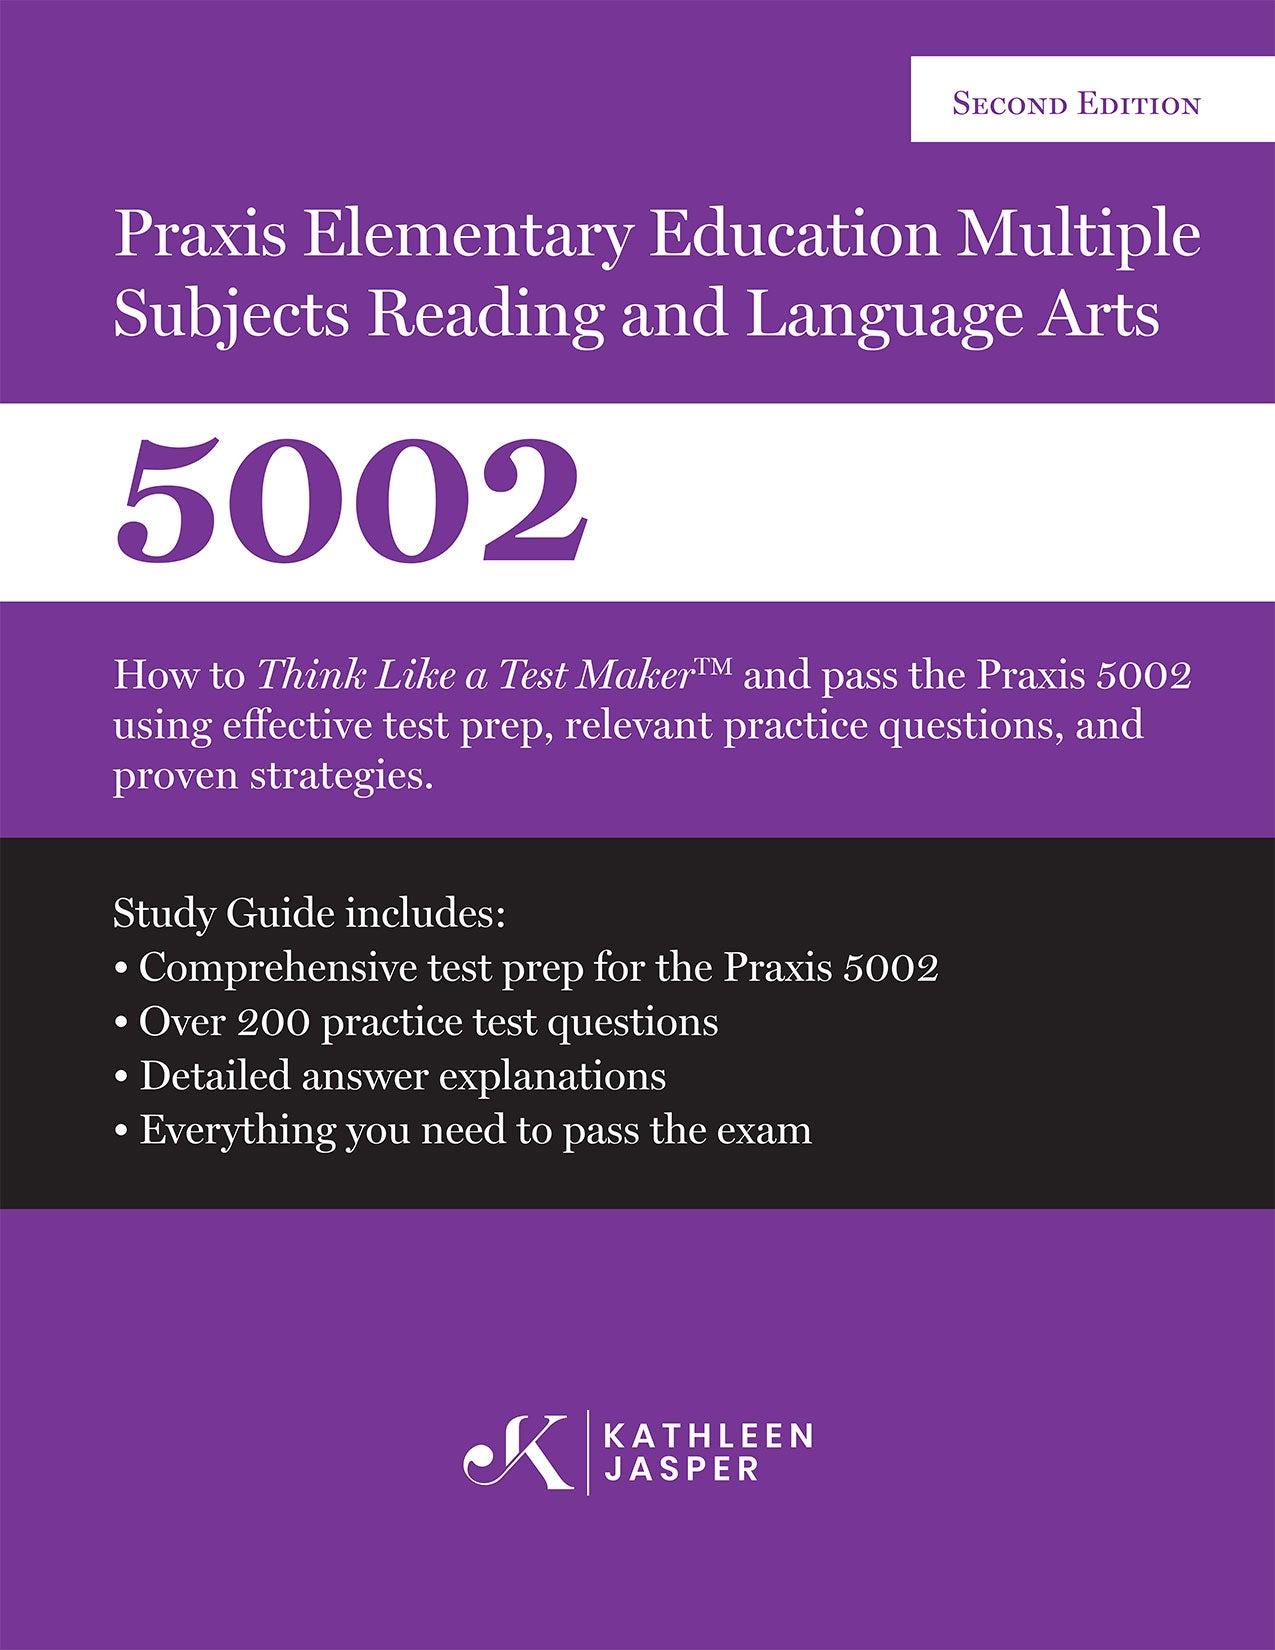 Praxis II Elementary Education 5001: Multiple Subjects Digital Study Guides (Second Edition)